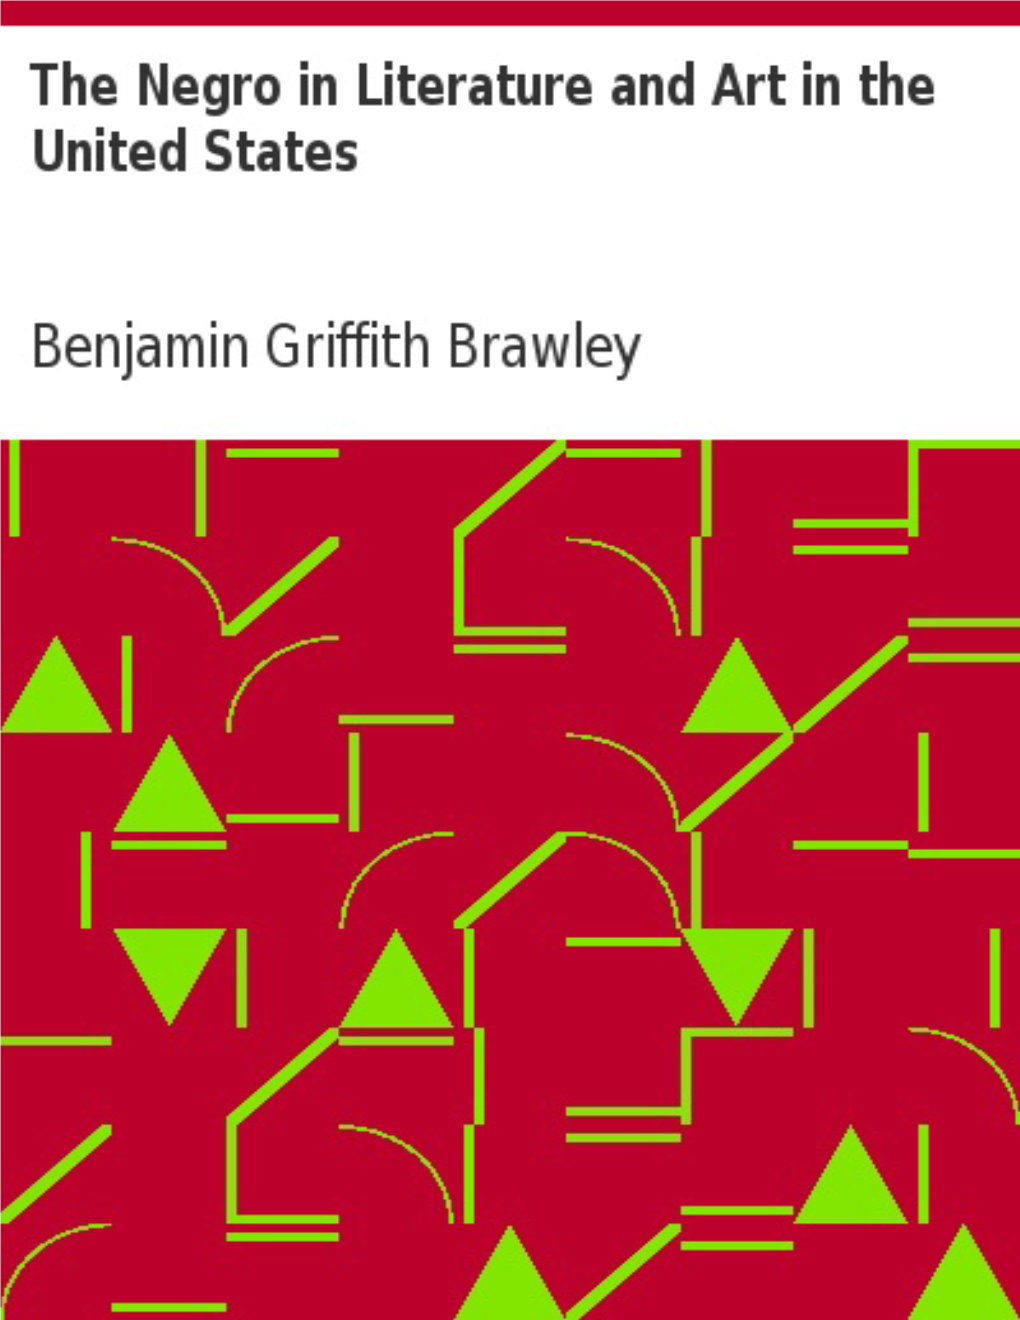 The Negro in Literature and Art in the United States, by Benjamin Brawley